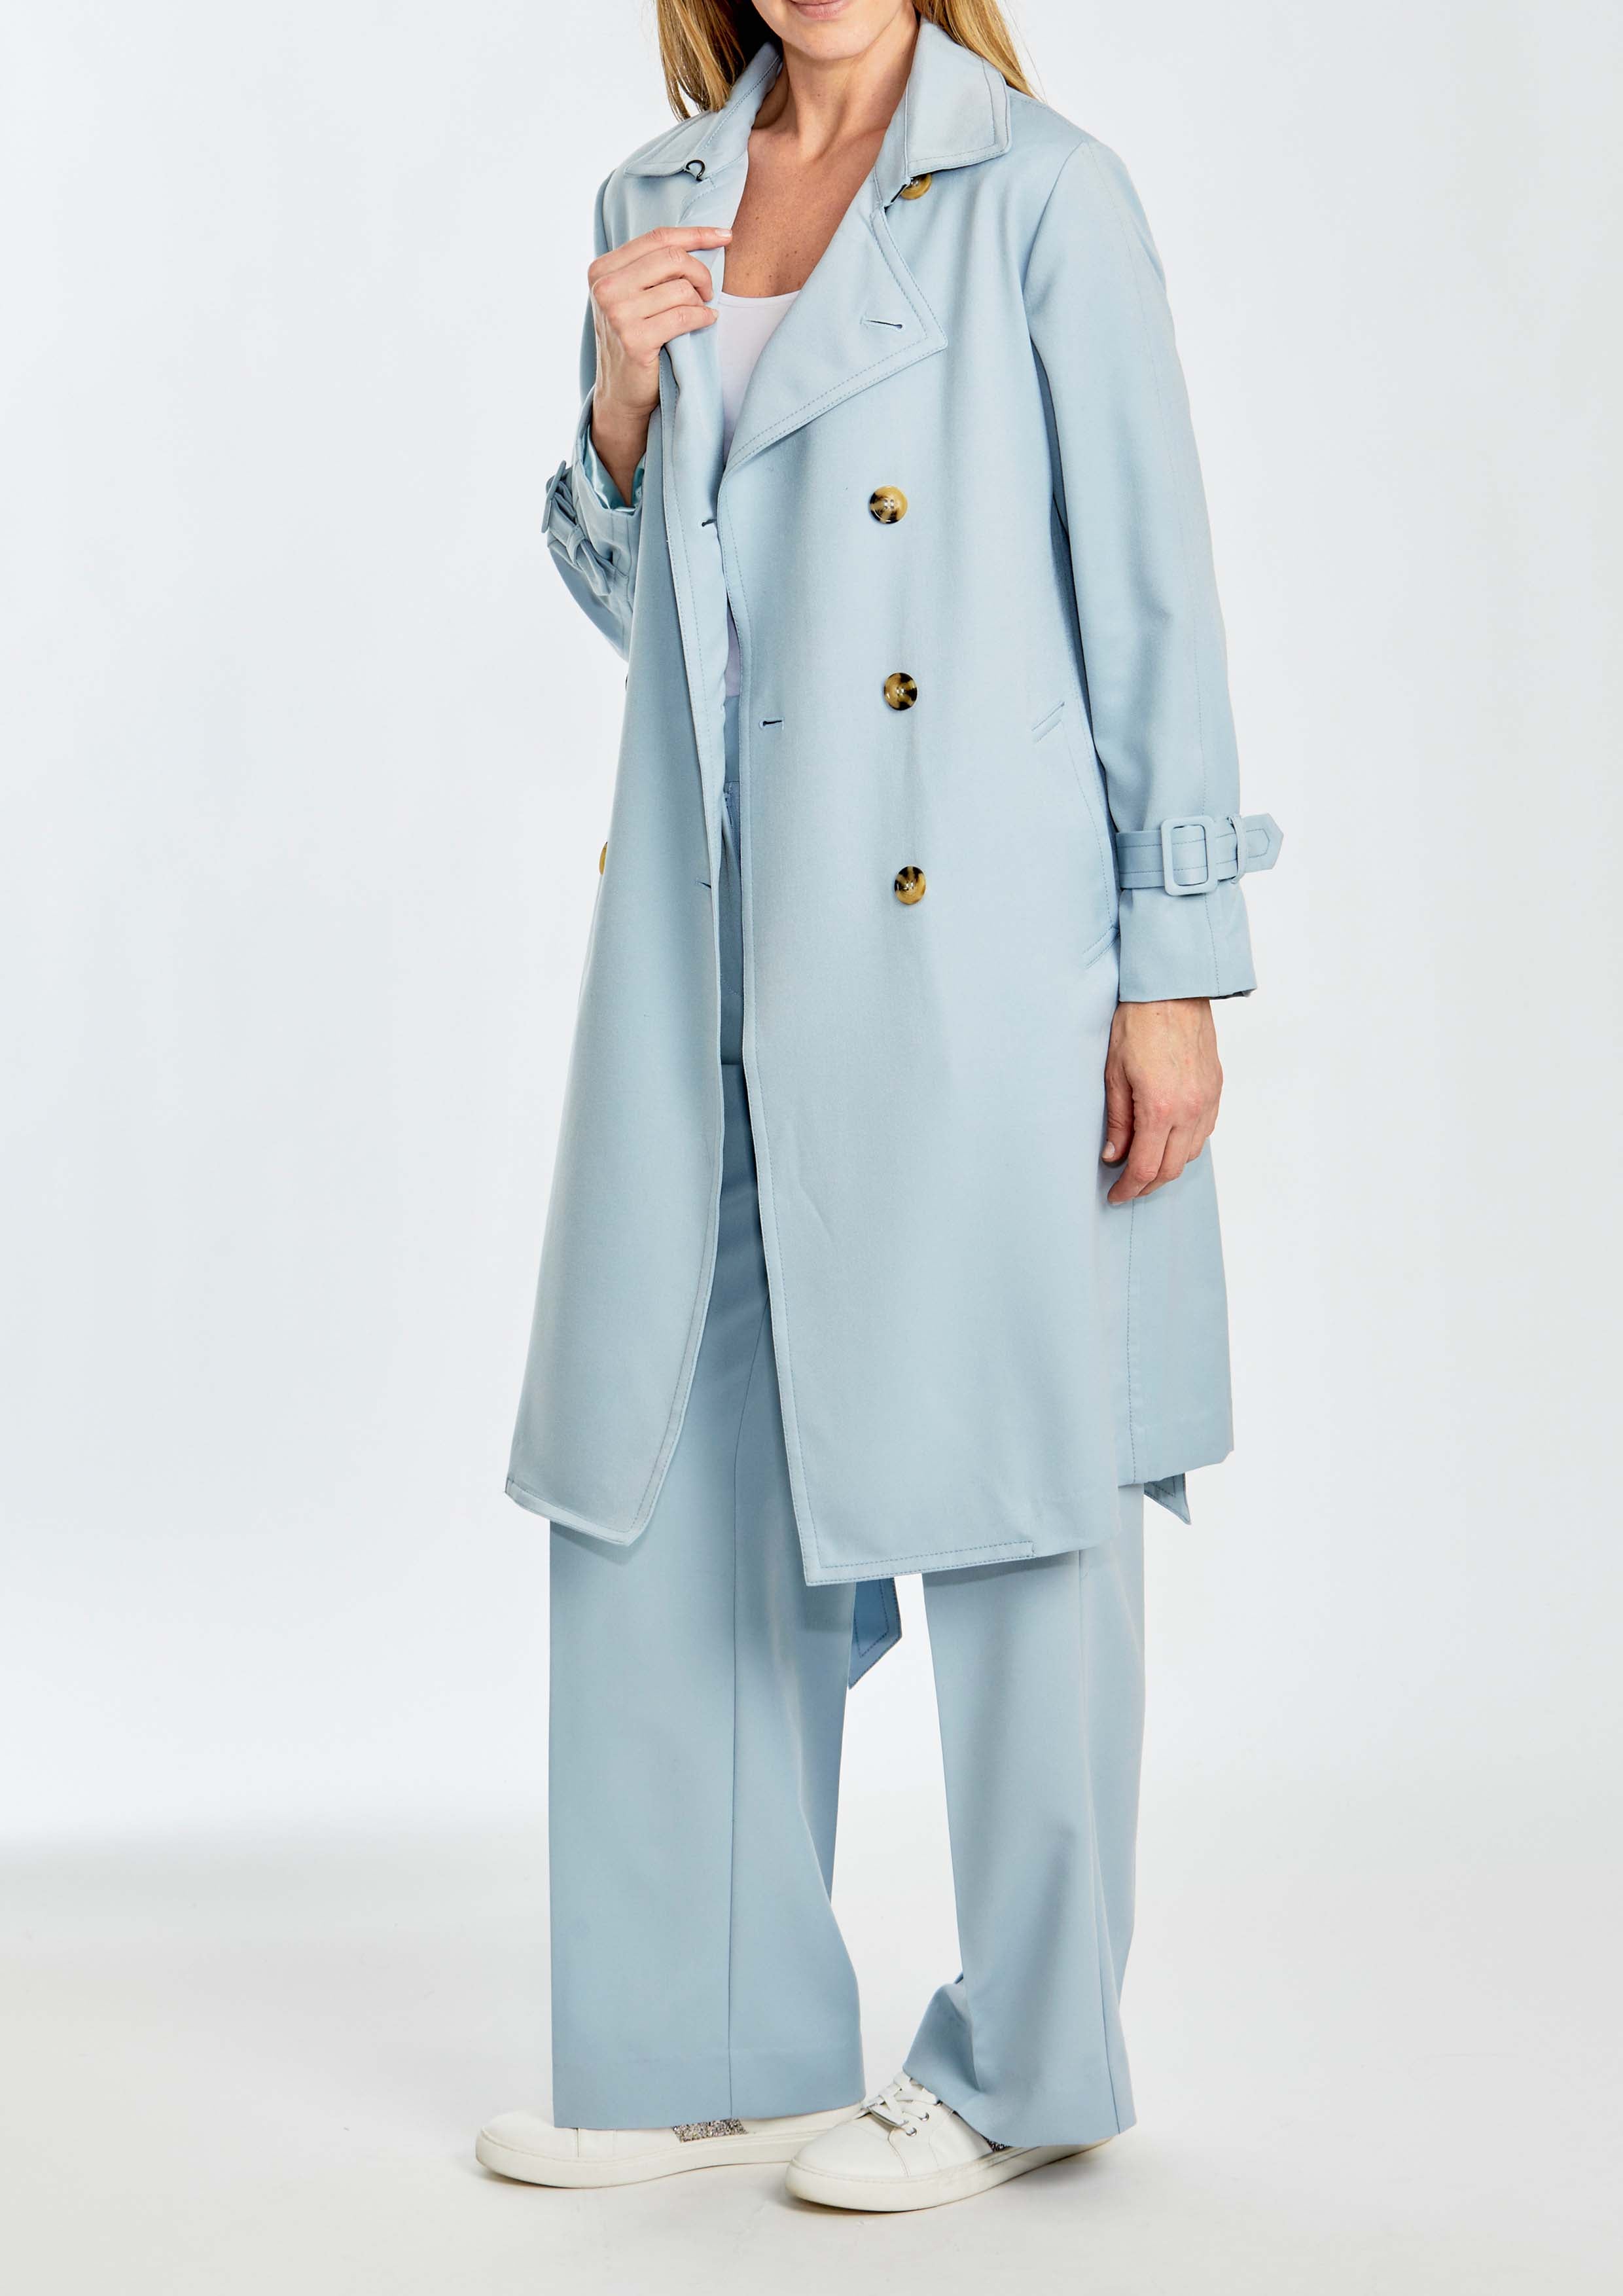 Ping Pong City Trench Coat - Baby Blue